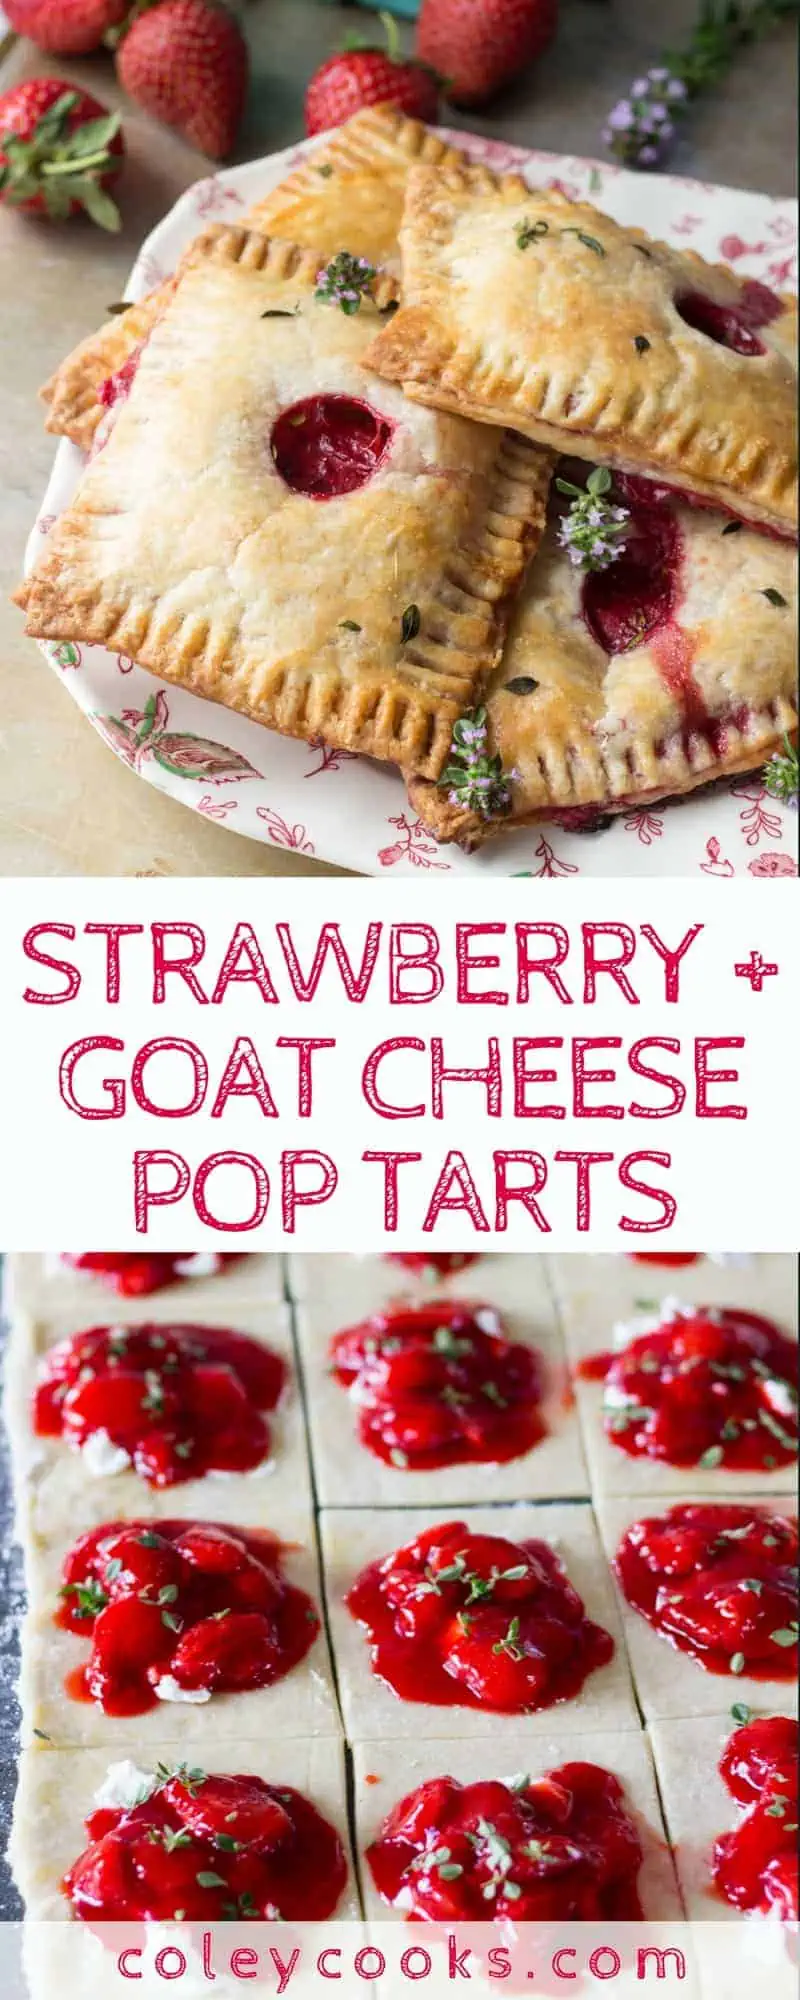 STRAWBERRY + GOAT CHEESE POP TARTS | This sweet and savory combination of strawberries and goat cheese wrapped in a flaky pastry makes an amazing breakfast or brunch treat! | ColeyCooks.com